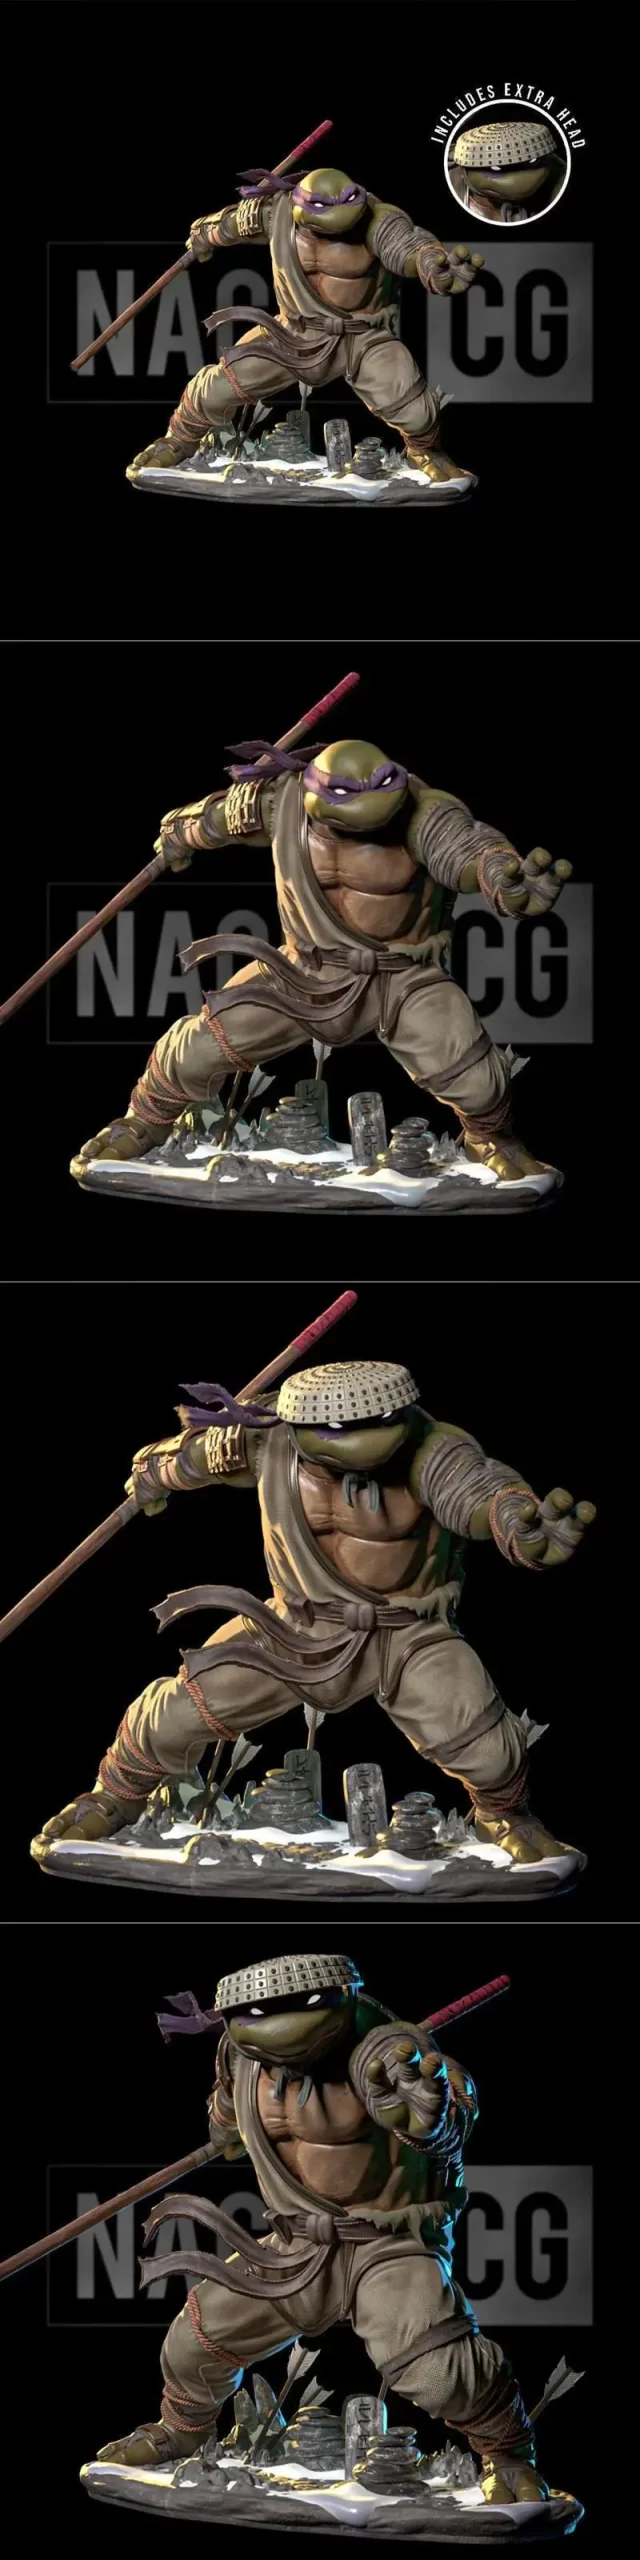 Donnie from TMNT - Last Ronin